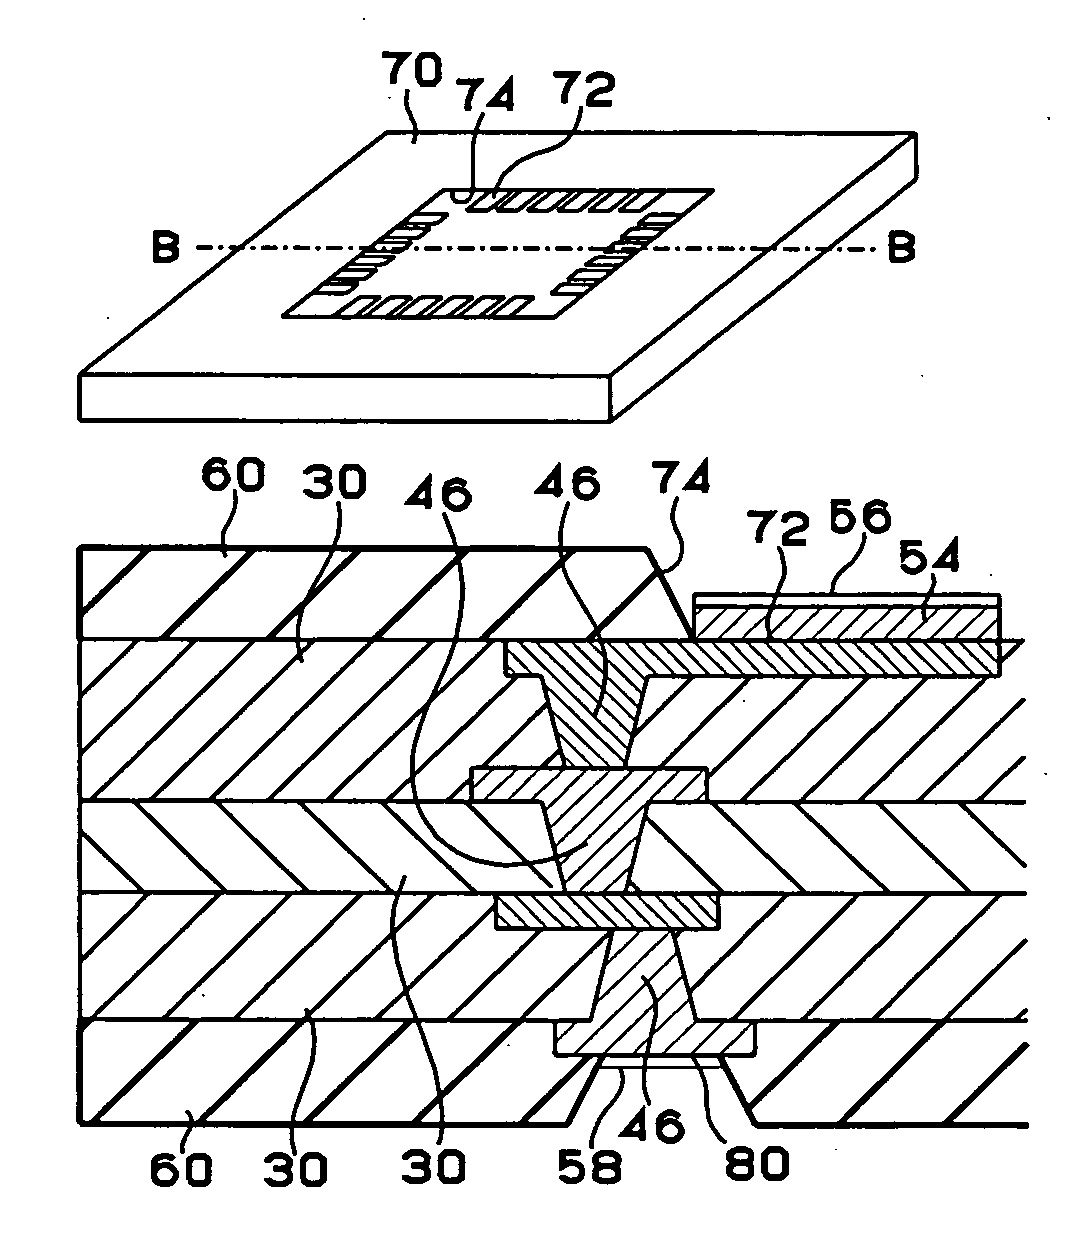 Multilayer printed wiring board and manufacturing method of the multilayer printed wiring board